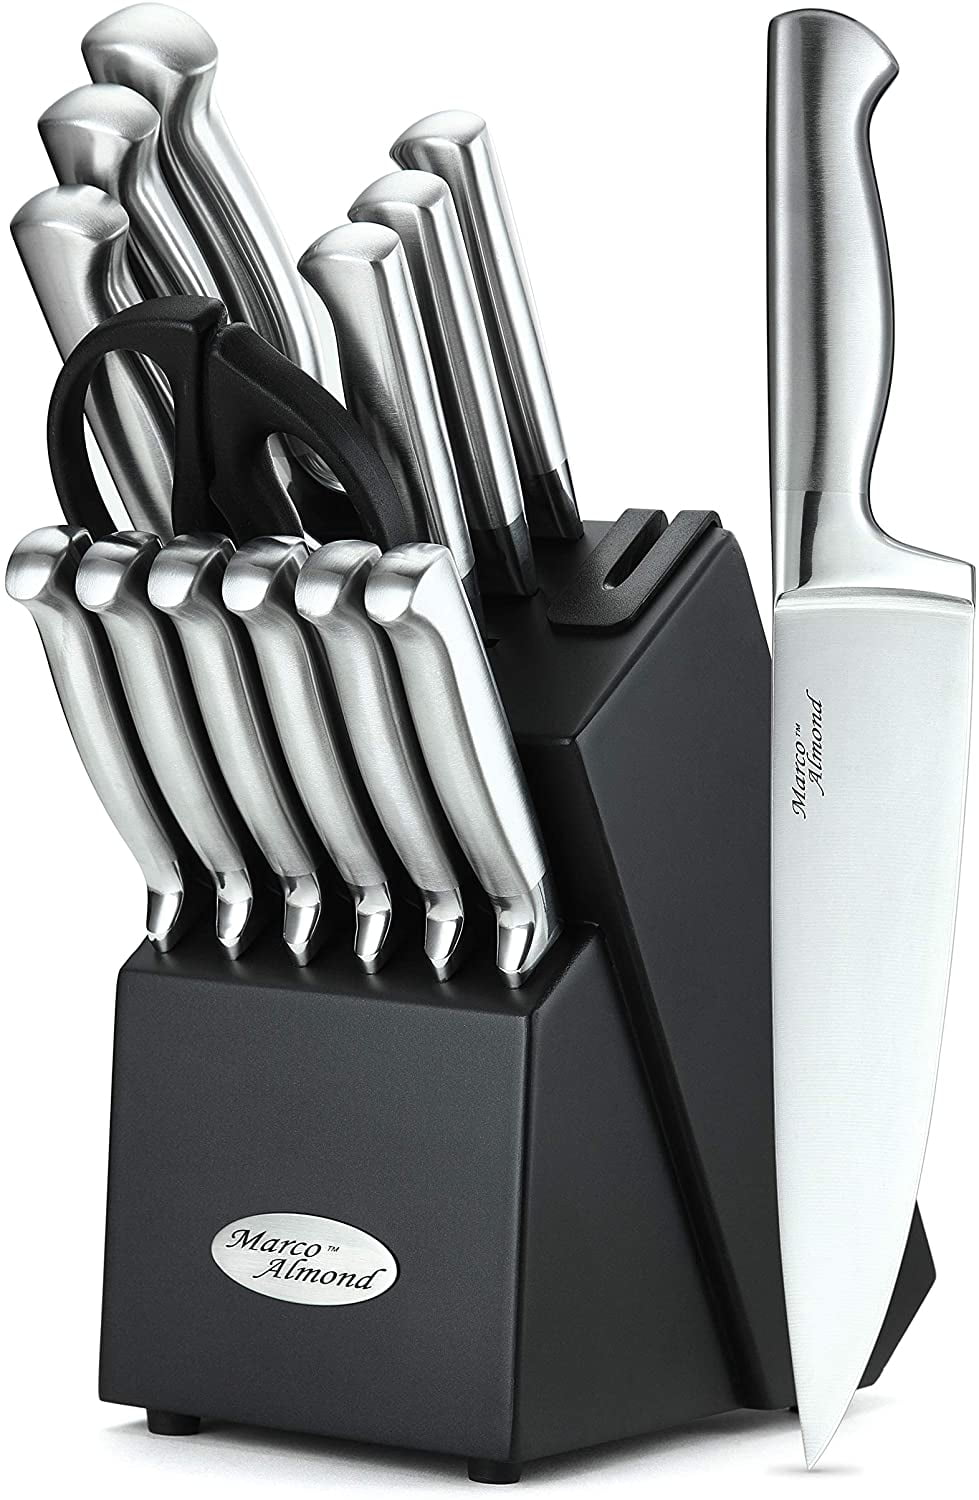 Rada Cutlery S56 3-Piece Basics Knife Gift Set – Stainless Steel Kitchen Knives with Aluminum Handles